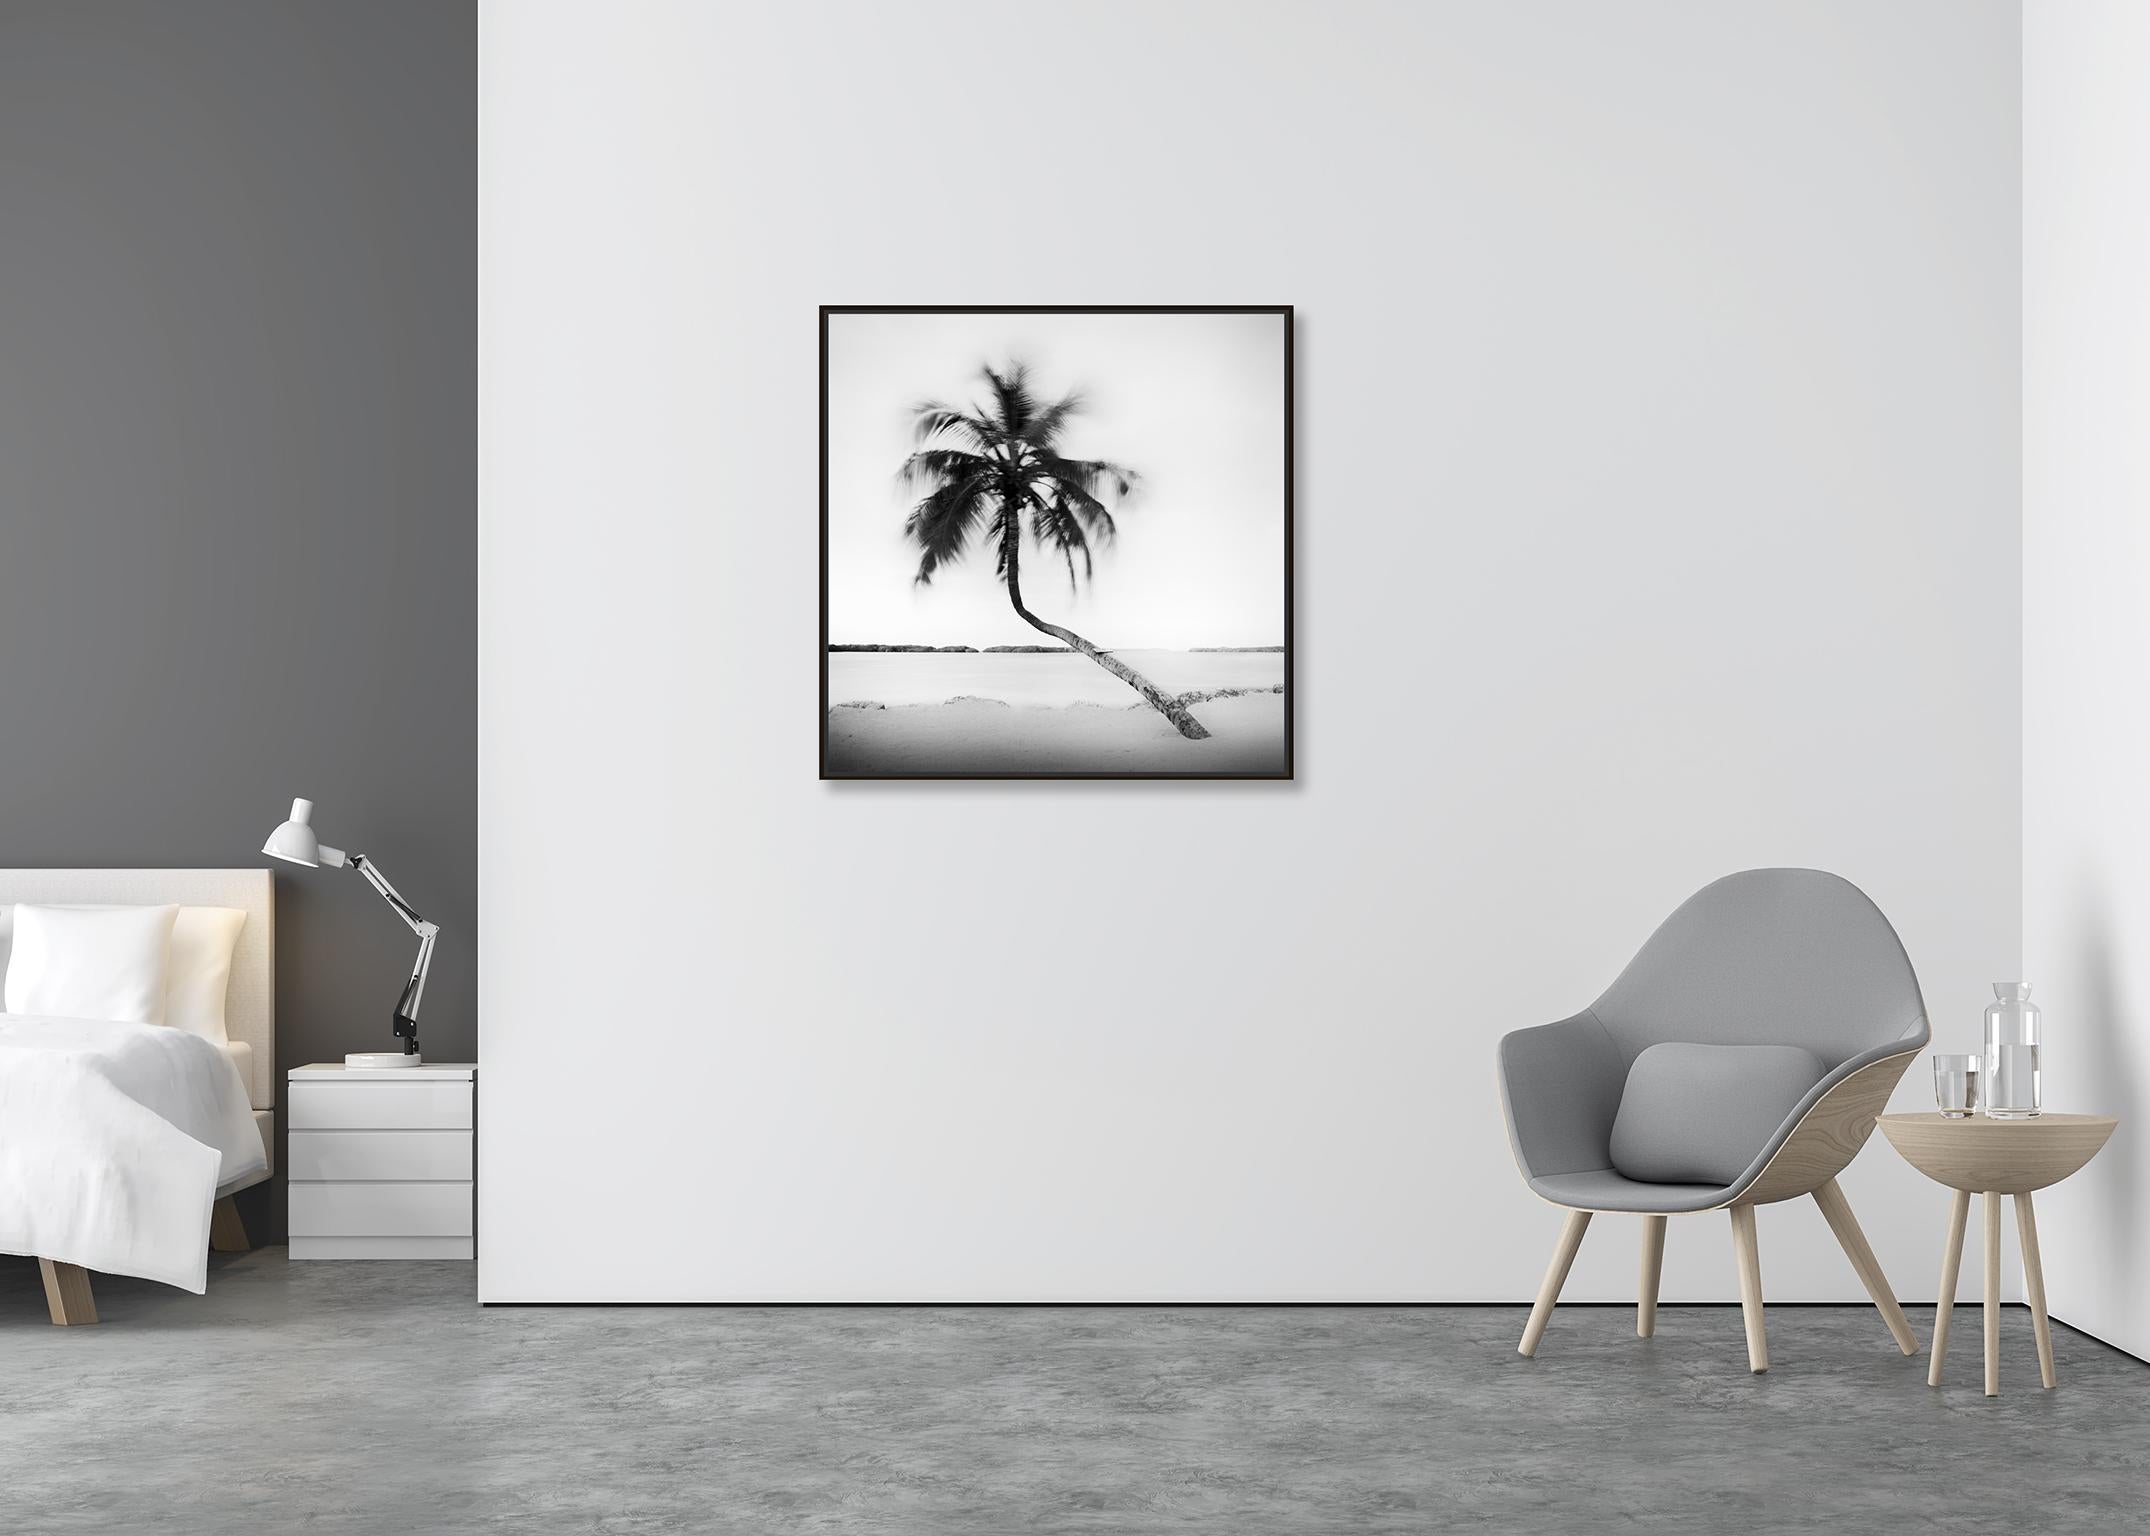 Bent Palm, Beach, Florida, USA, black and white fine art photography landscape - Gray Black and White Photograph by Gerald Berghammer, Ina Forstinger